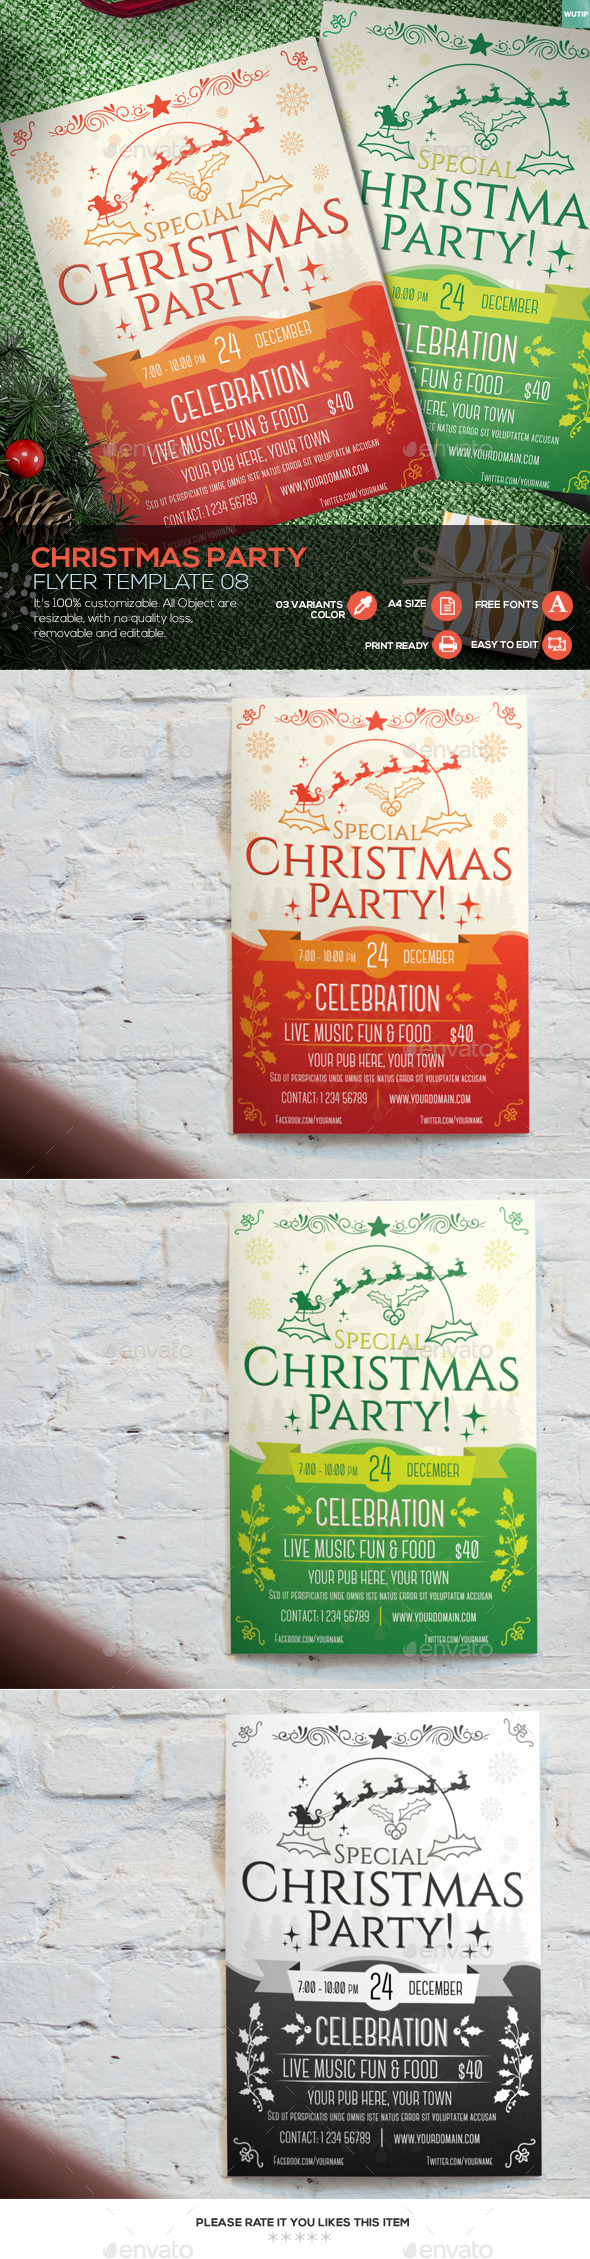 Christmas Party - Flyer Template 08